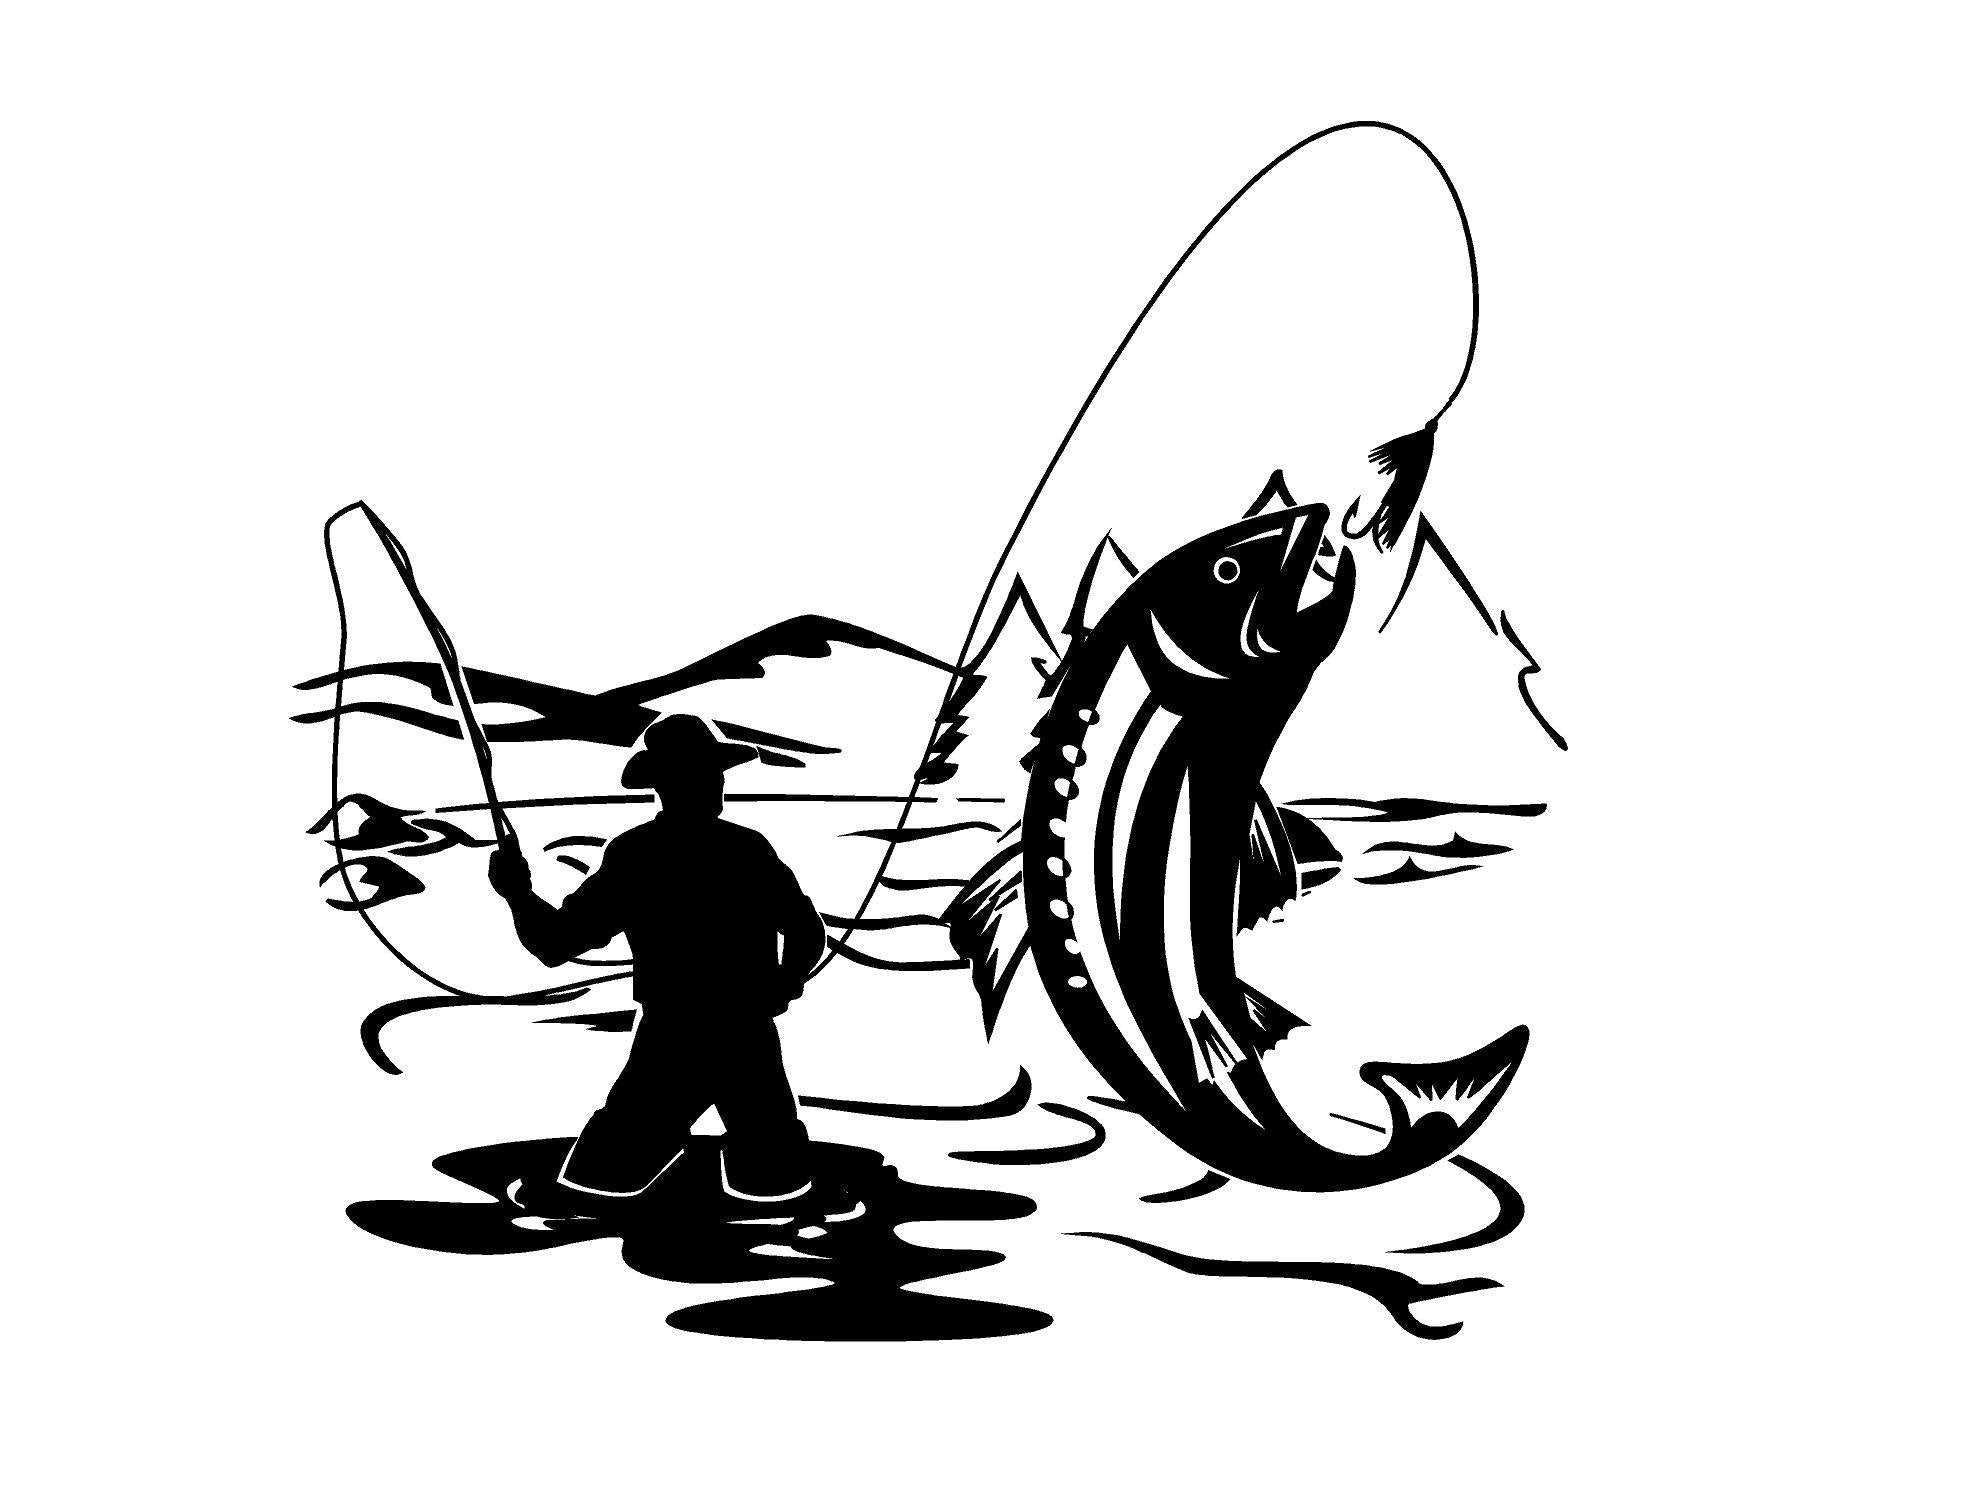 Fly Vinyl Decal, Fly Fishing Decal, Fly Fishing Vinyl Sticker, Fly Fishing  Sticker, Fly Fishing Window Decal, Fly Fishing, Fly Decal, Fly 